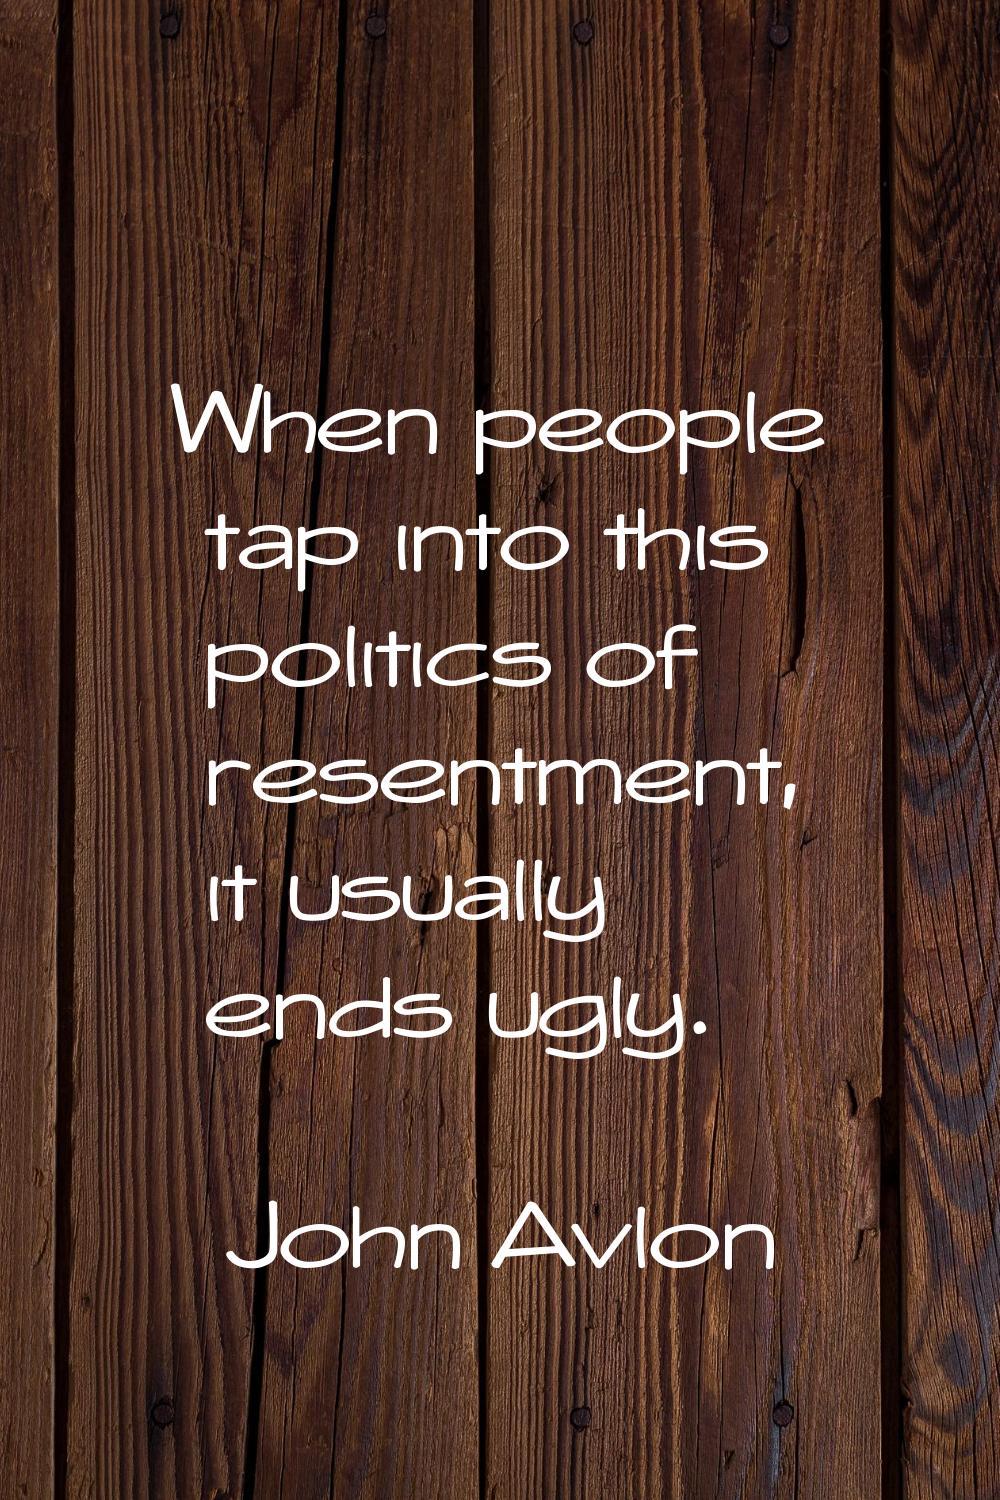 When people tap into this politics of resentment, it usually ends ugly.